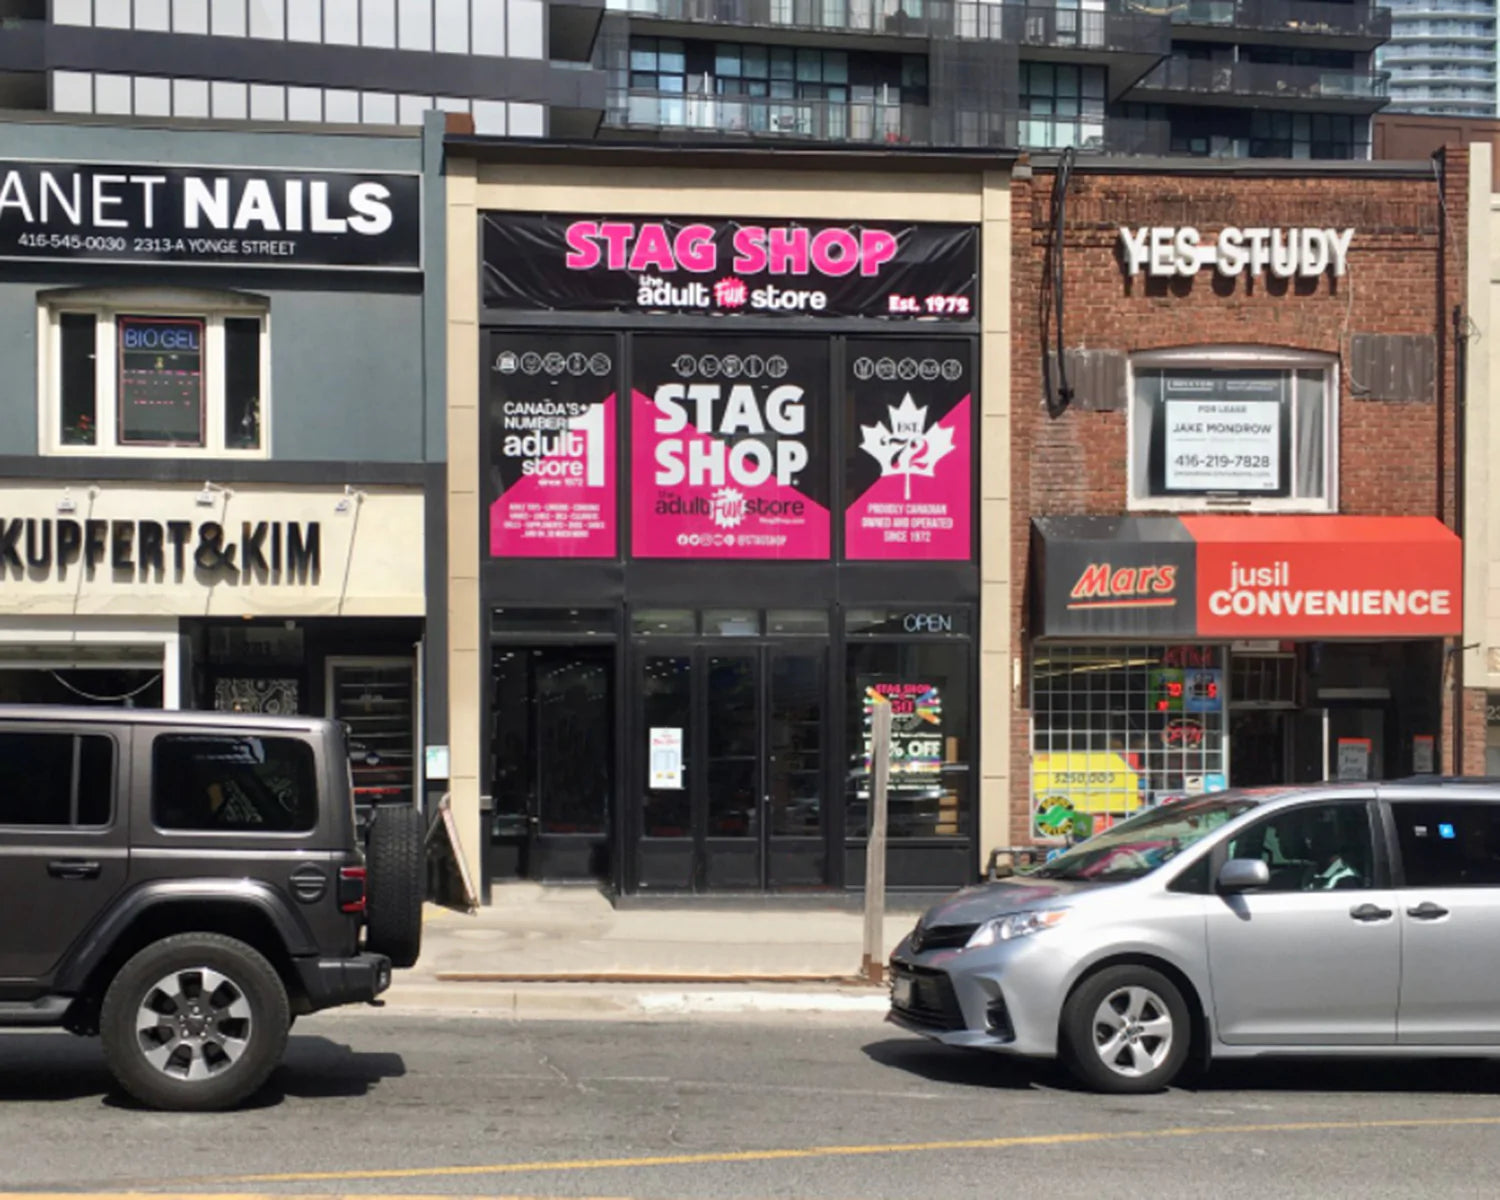 Stag Shop - The Trusted Sex Store in Yonge & Eglinton Toronto